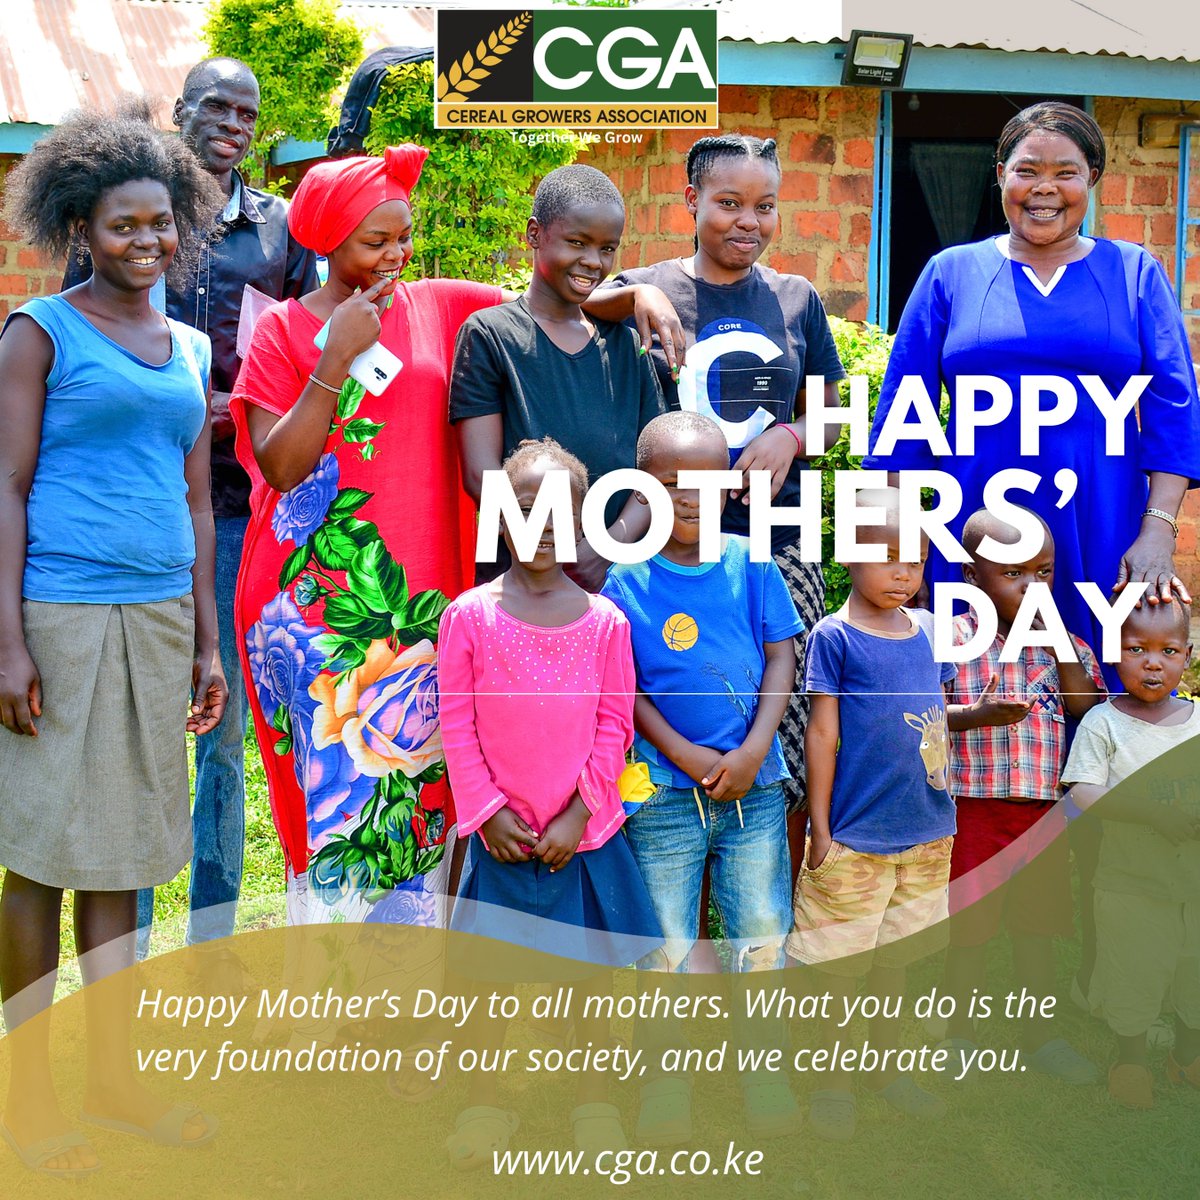 On this joyous occasion, we would like to take a moment to express our sincere respect and admiration for all the remarkable mothers who are working tirelessly in the farming industry. Your unwavering dedication and tireless efforts in growing and providing fresh and nutritious…